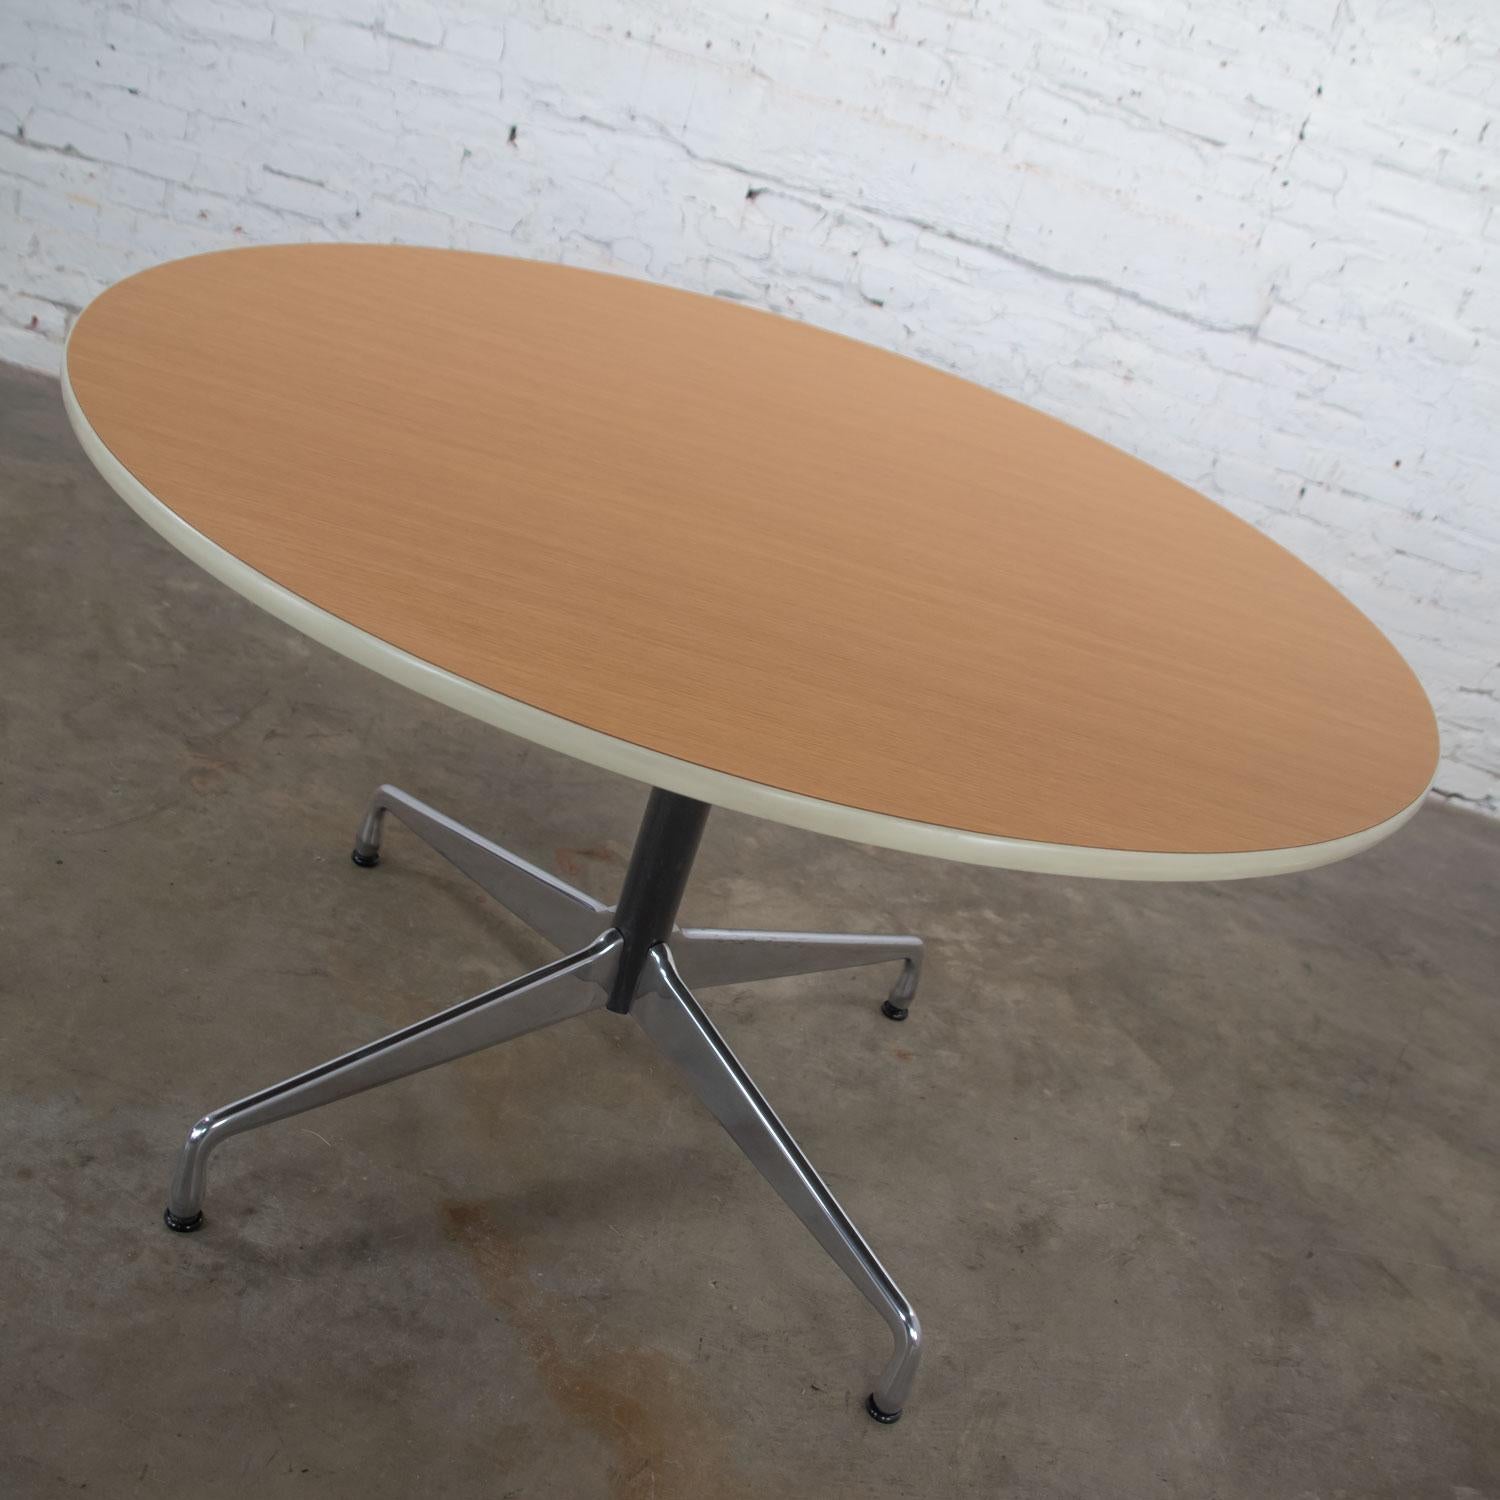 American Eames Herman Miller Round Table Universal Base Wood Grain Laminate Top For Sale